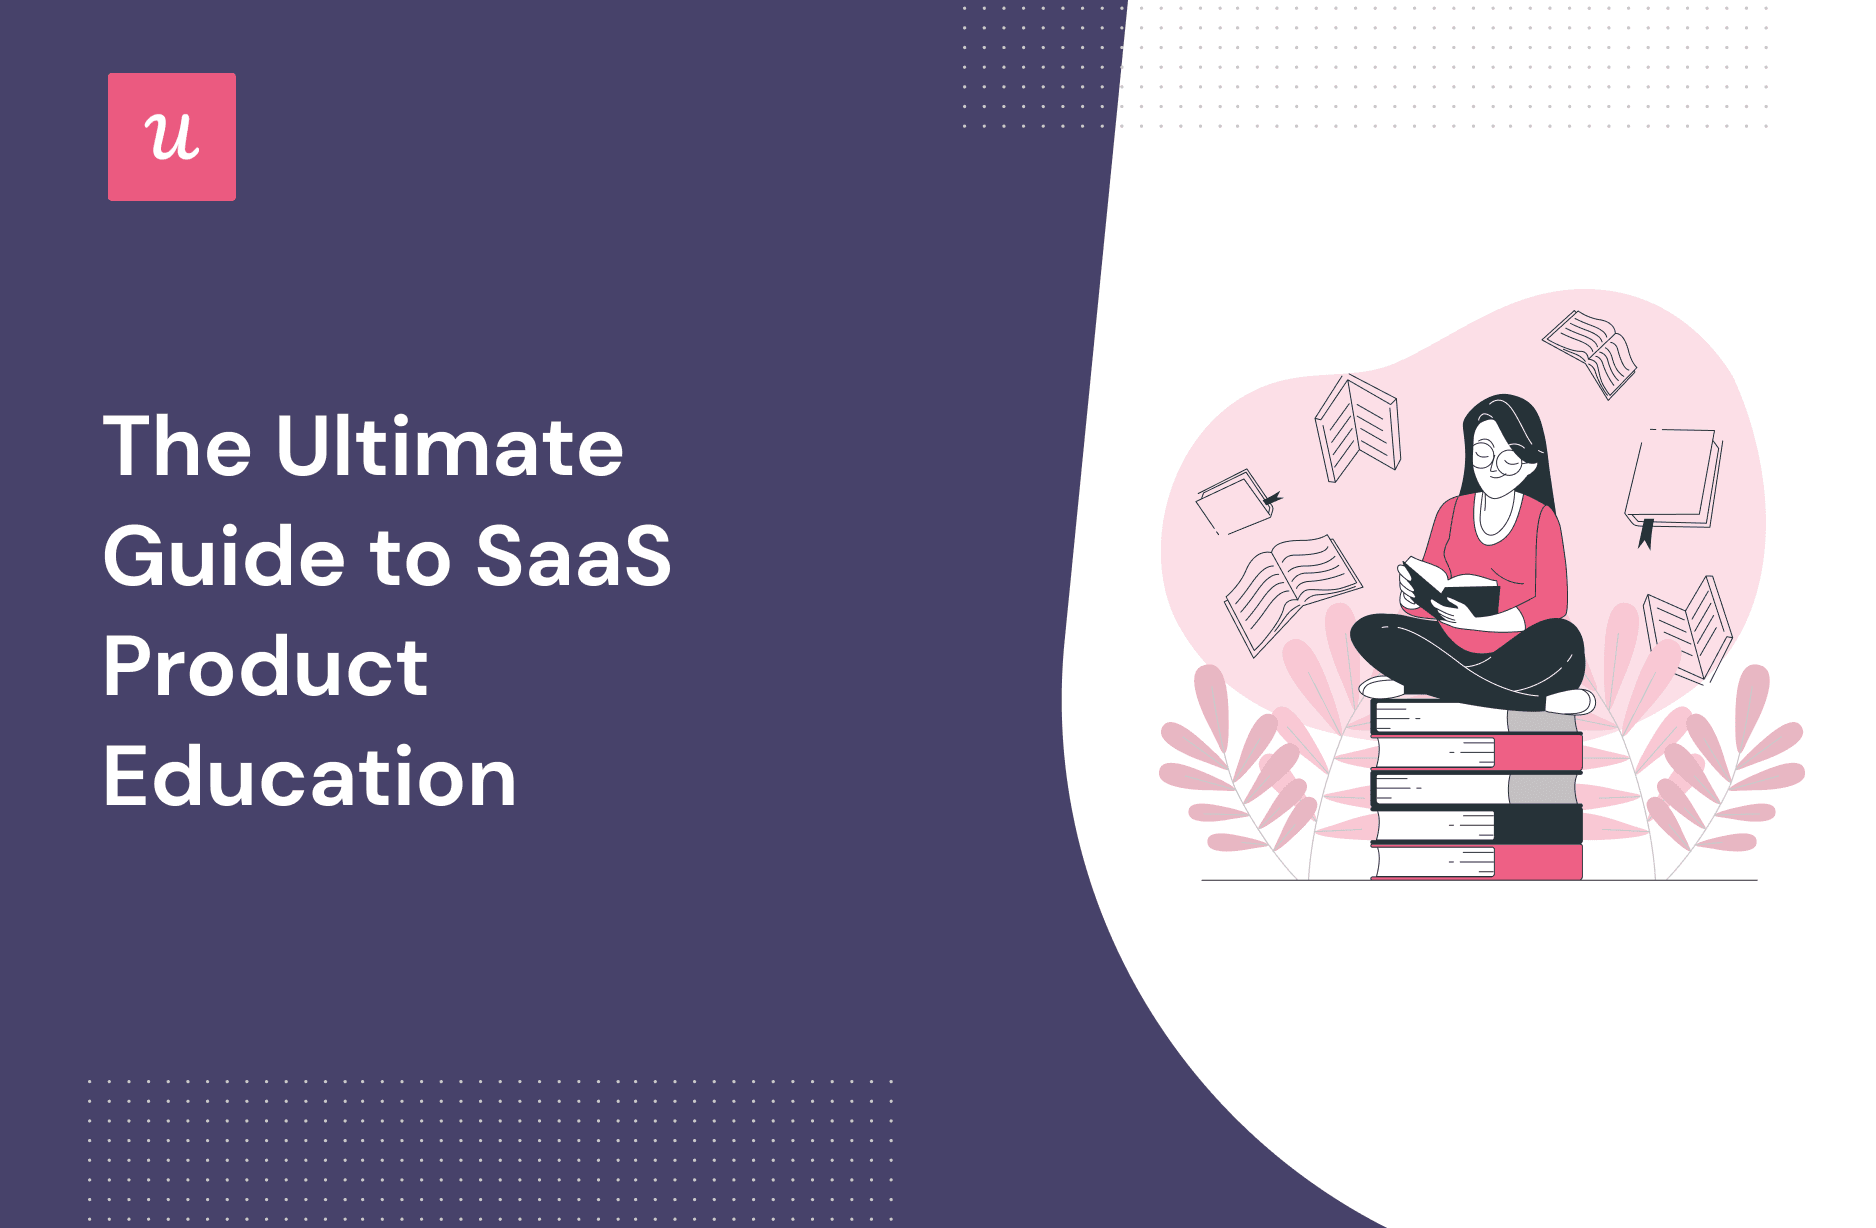 The Ultimate Guide to SaaS Product Education